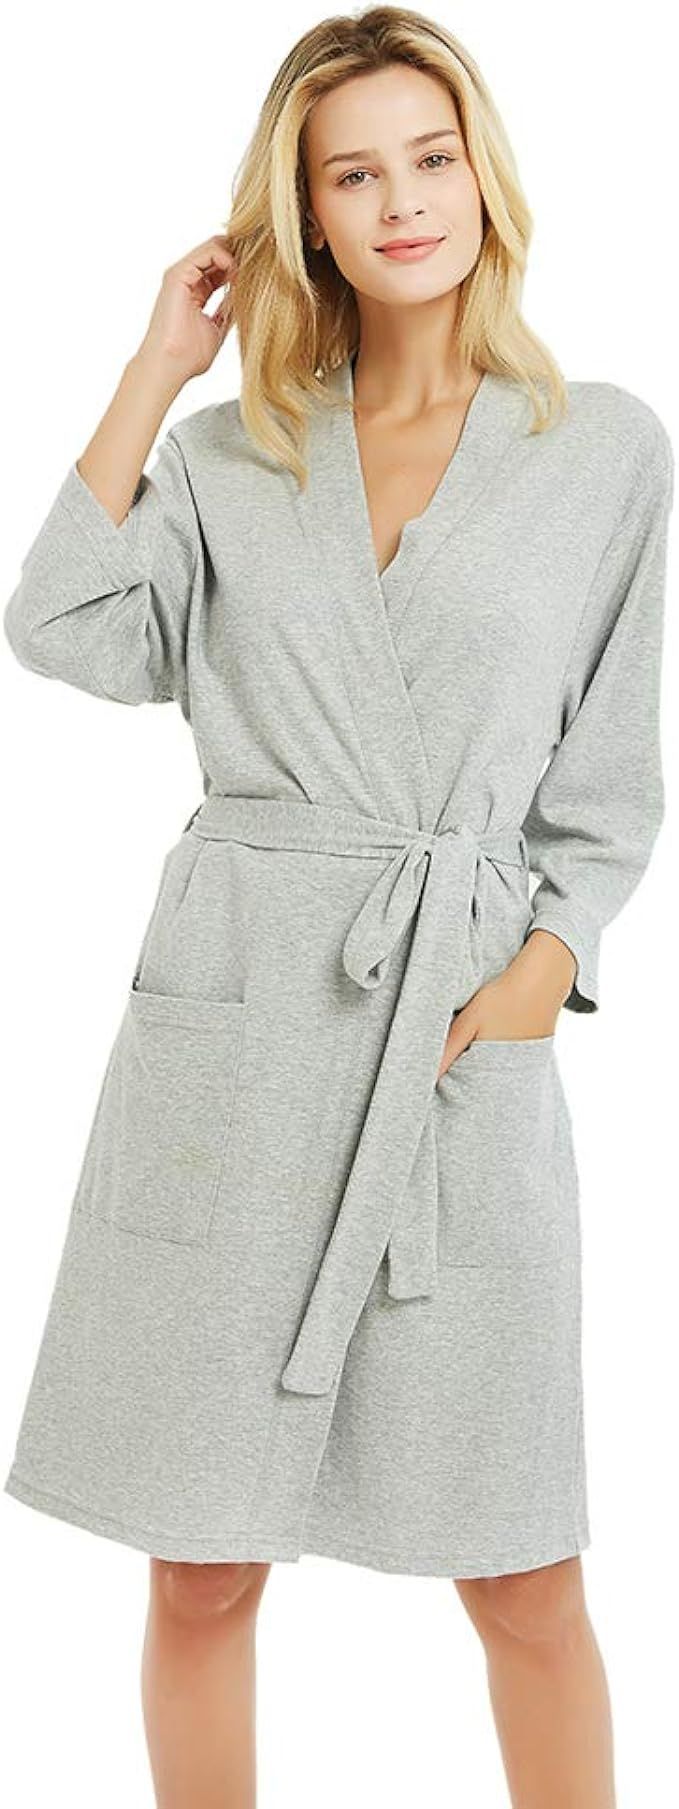 U2SKIIN Womens Cotton Robes, Lightweight Robes for Women with 3/4 Sleeves Knit Bathrobe Soft Slee... | Amazon (US)